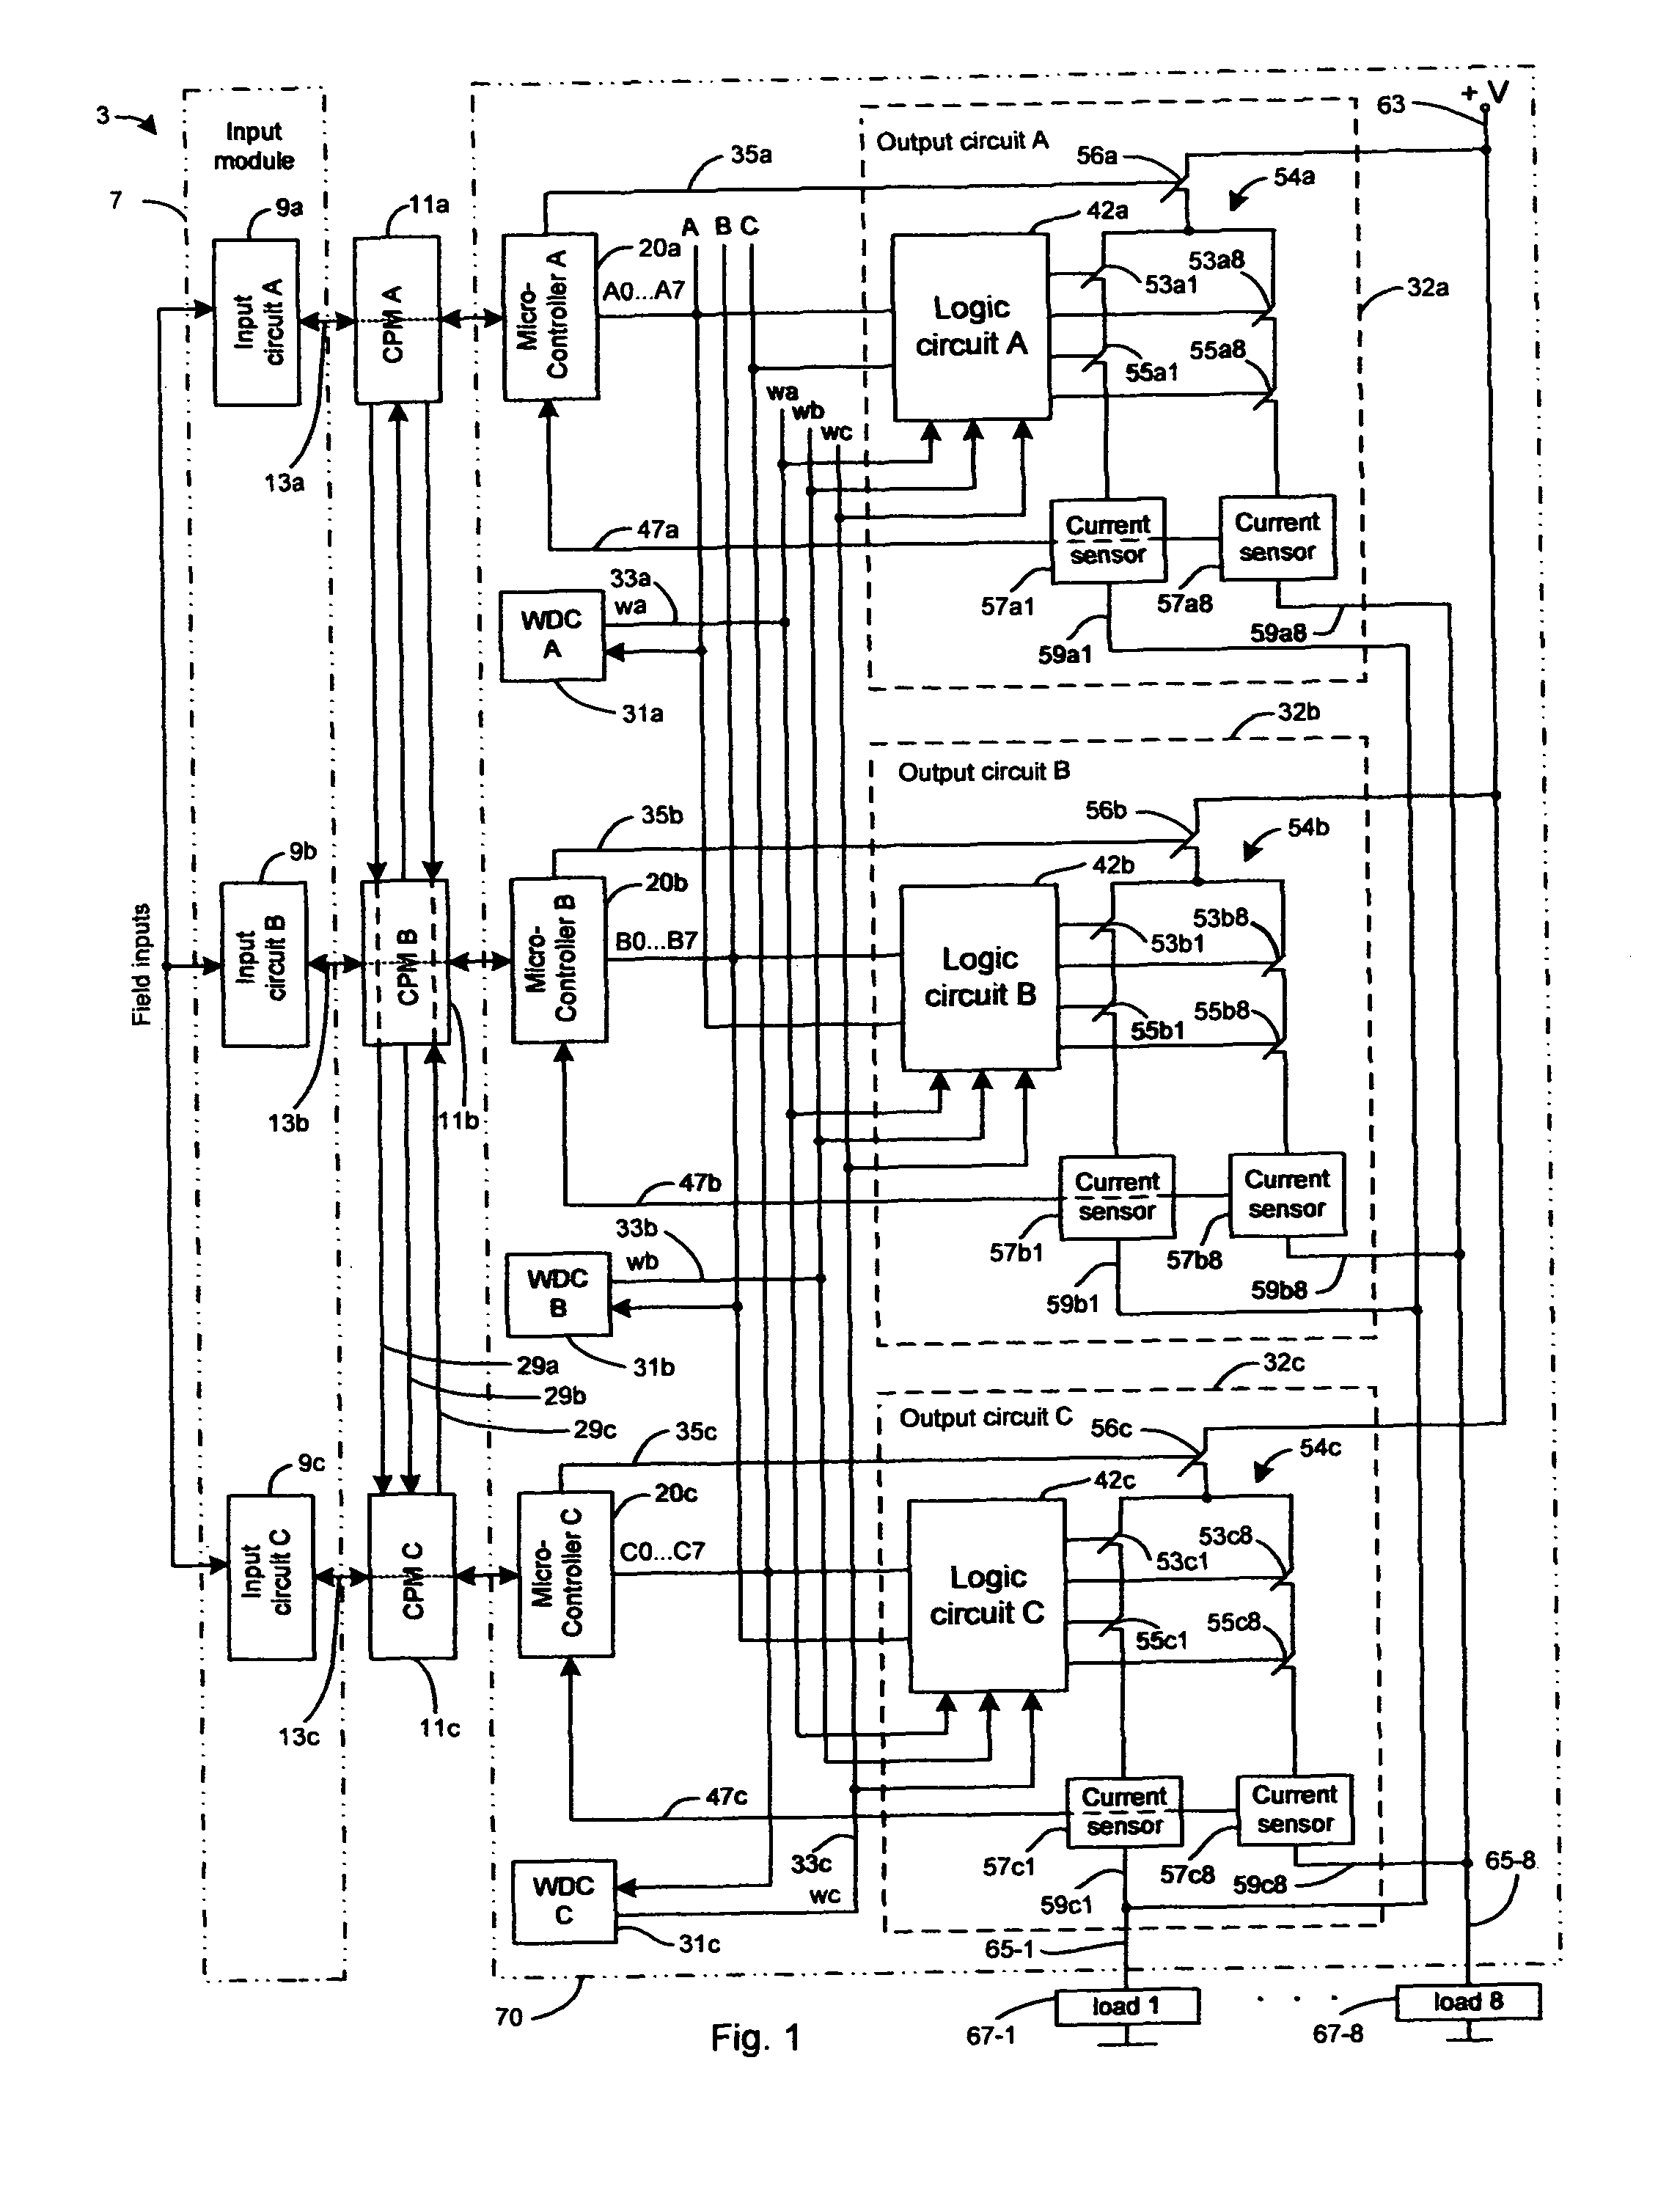 Multiple redundant computer system combining fault diagnostics and majority voting with dissimilar redundancy technology